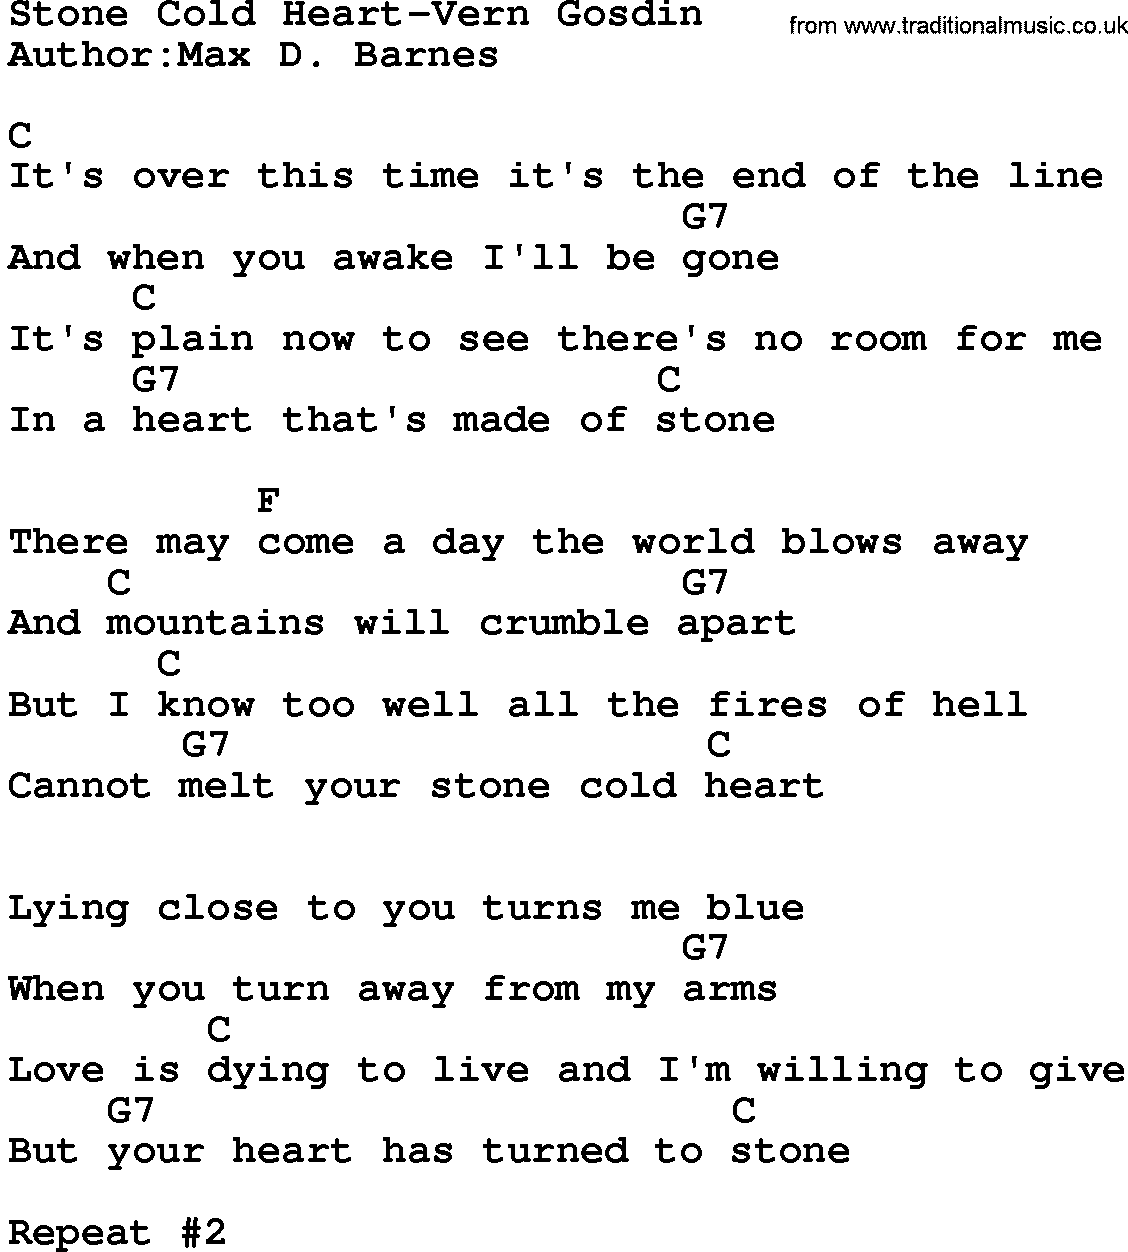 Country music song: Stone Cold Heart-Vern Gosdin lyrics and chords